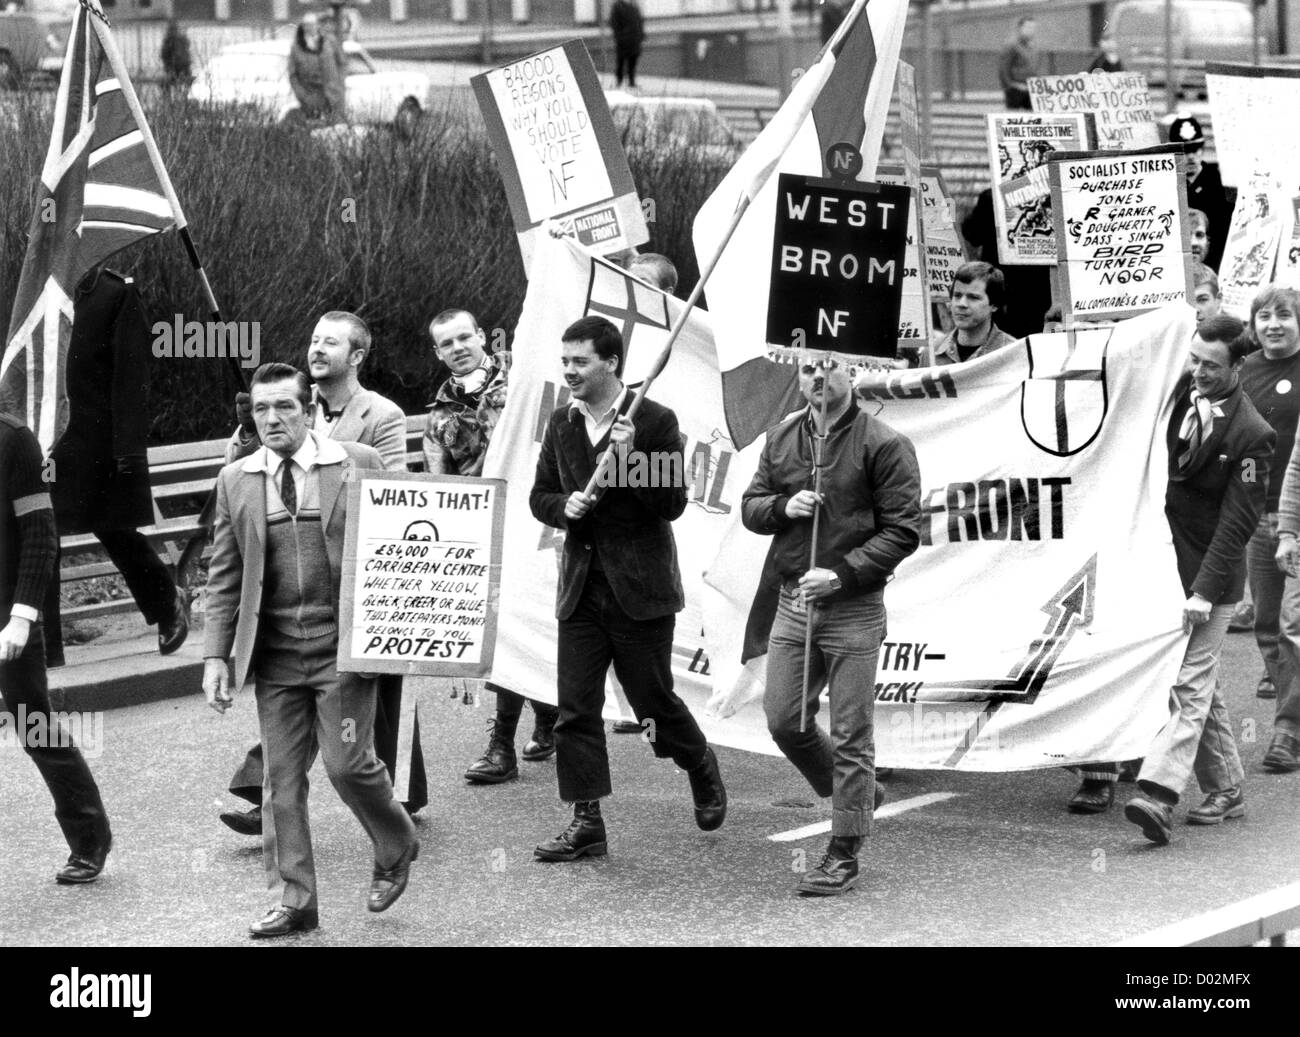 National Front march in Wolverhampton 1981. Britain British England English 1980s politics political rally action far right working class street streets protest Uk. Local council NF candidate Eric Shaw leads the way. Stock Photo